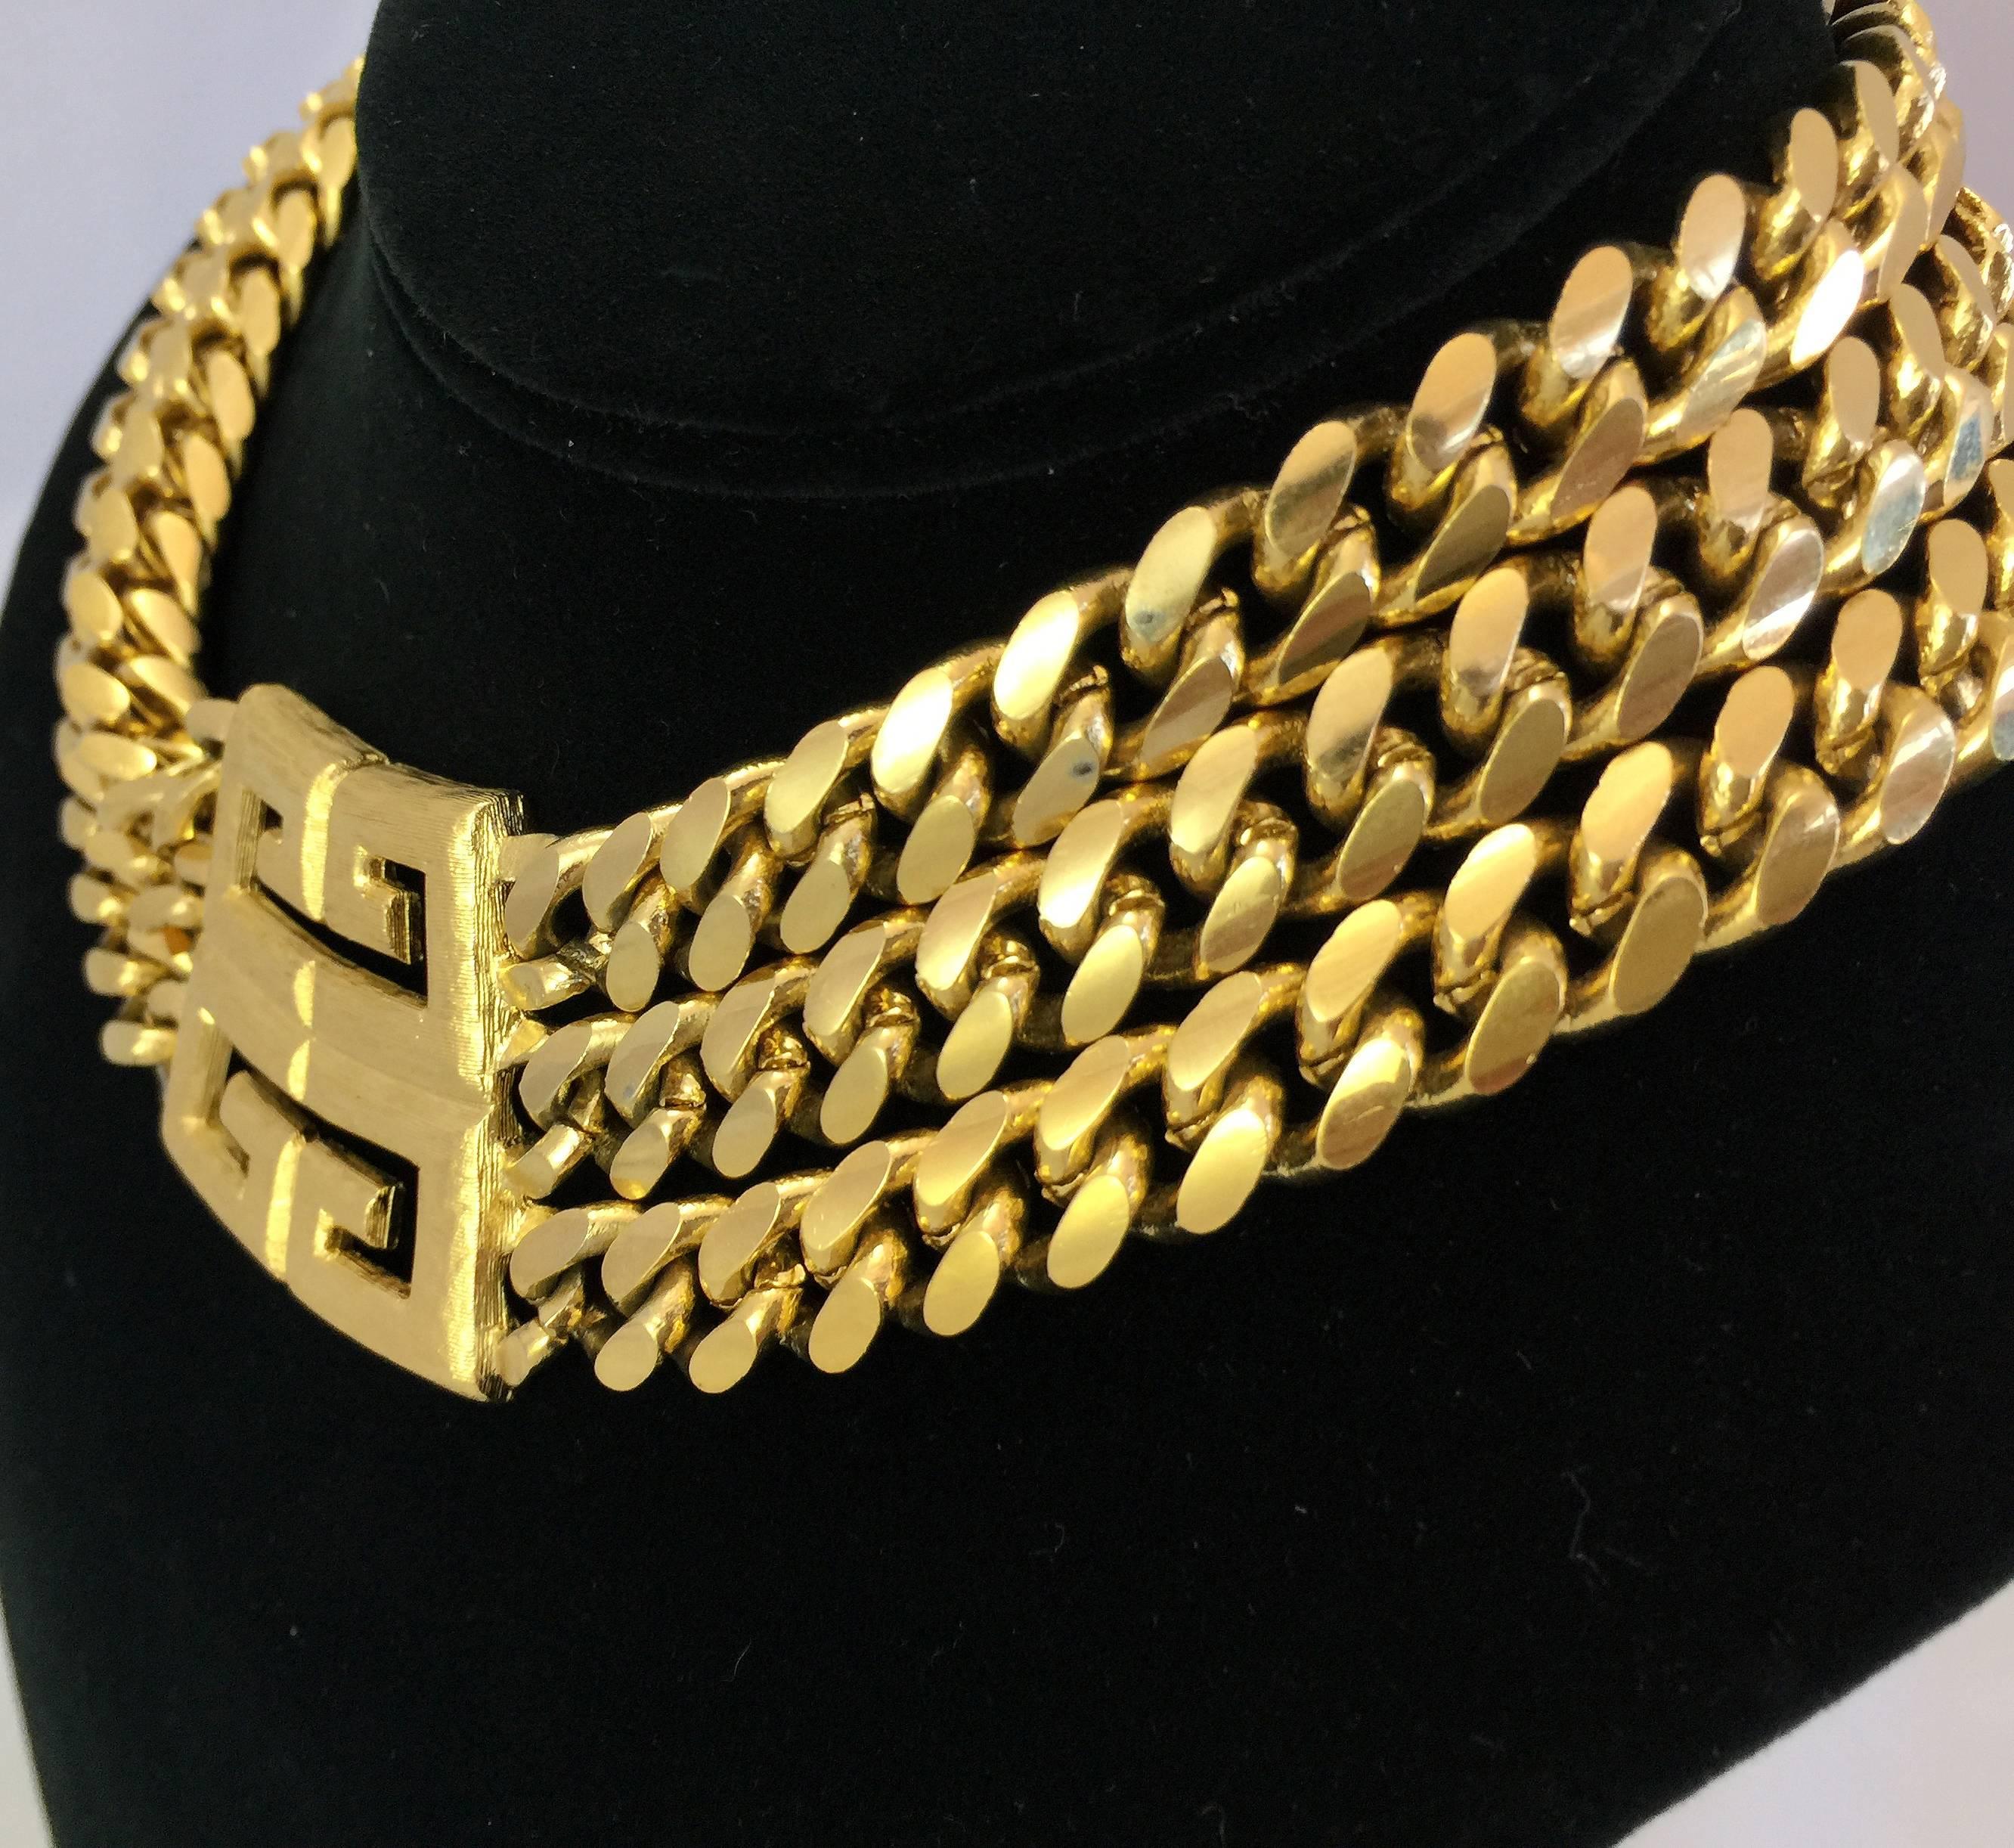 Givenchy Triple chain gold tone necklace with center double stacked double G Givenchy Monogram pendant and adjustable back fastener.

Signed: "Givenchy"

Measurements: 
18 inches long & 2.5 inches wide 

Good Vintage Condition: Please